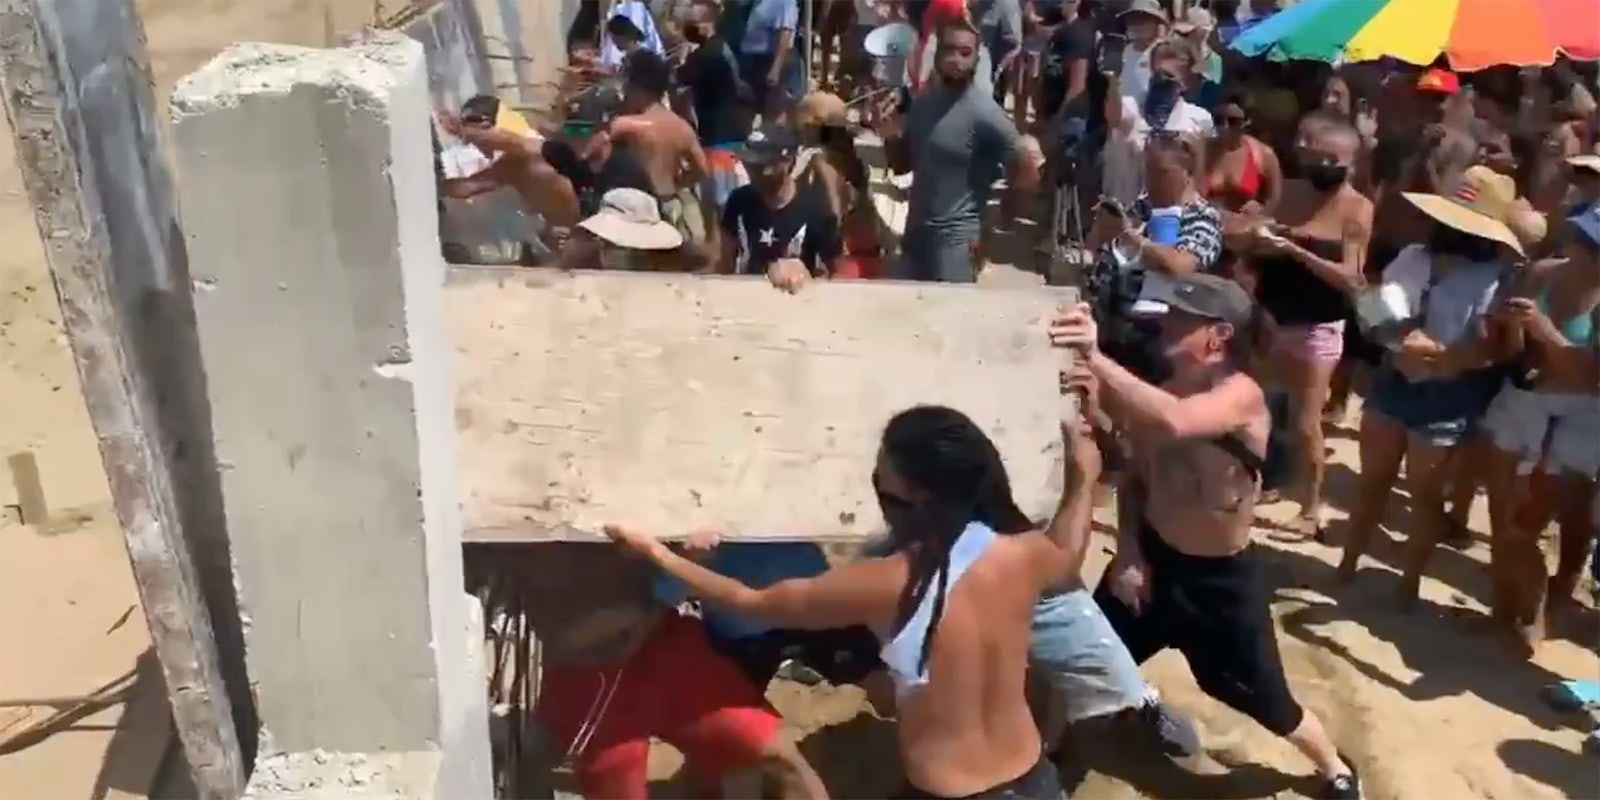 People busting down a fence.